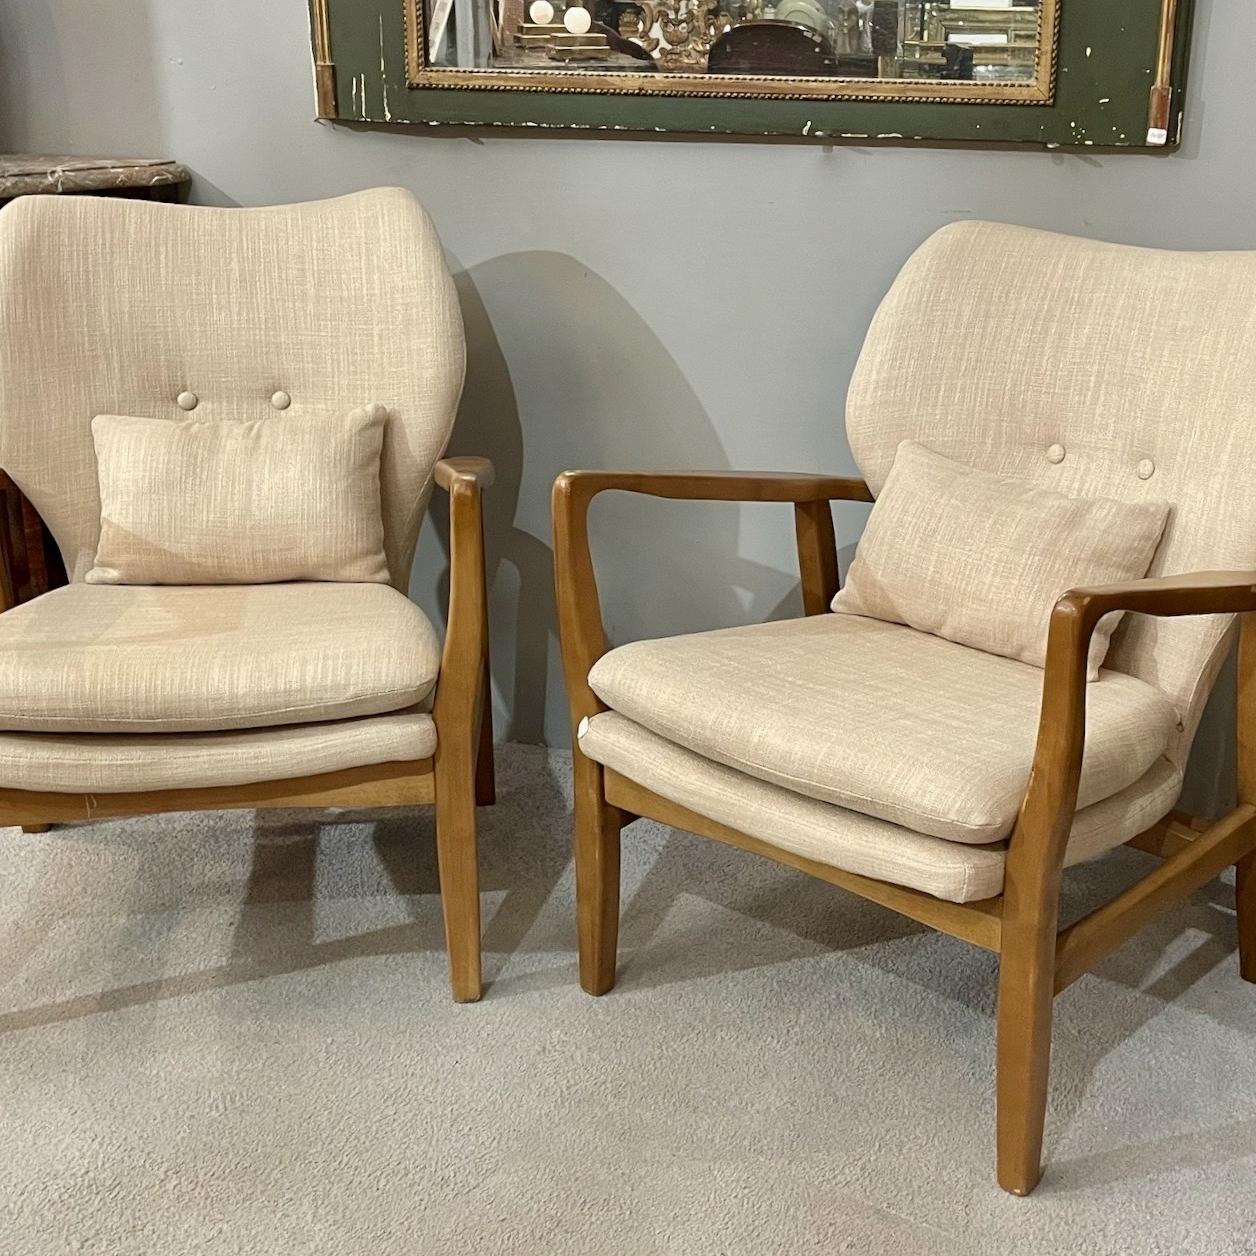 Pair of Guillerme and Chambron style Armchairs, 20th Century